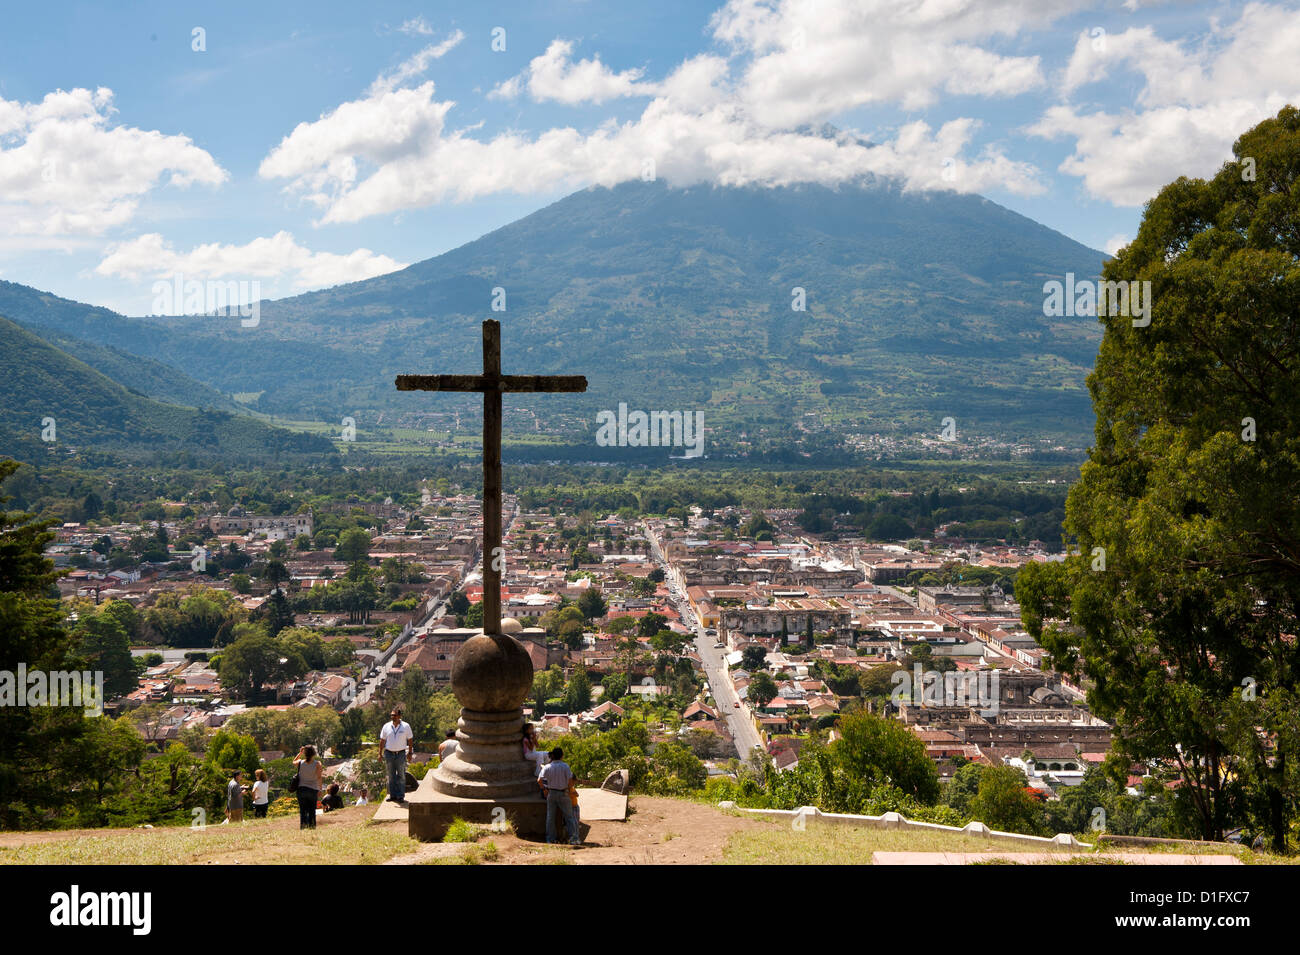 View of Antigua from Cross on the Hill Park, UNESCO World Heritage Site, Guatemala, Central America Stock Photo